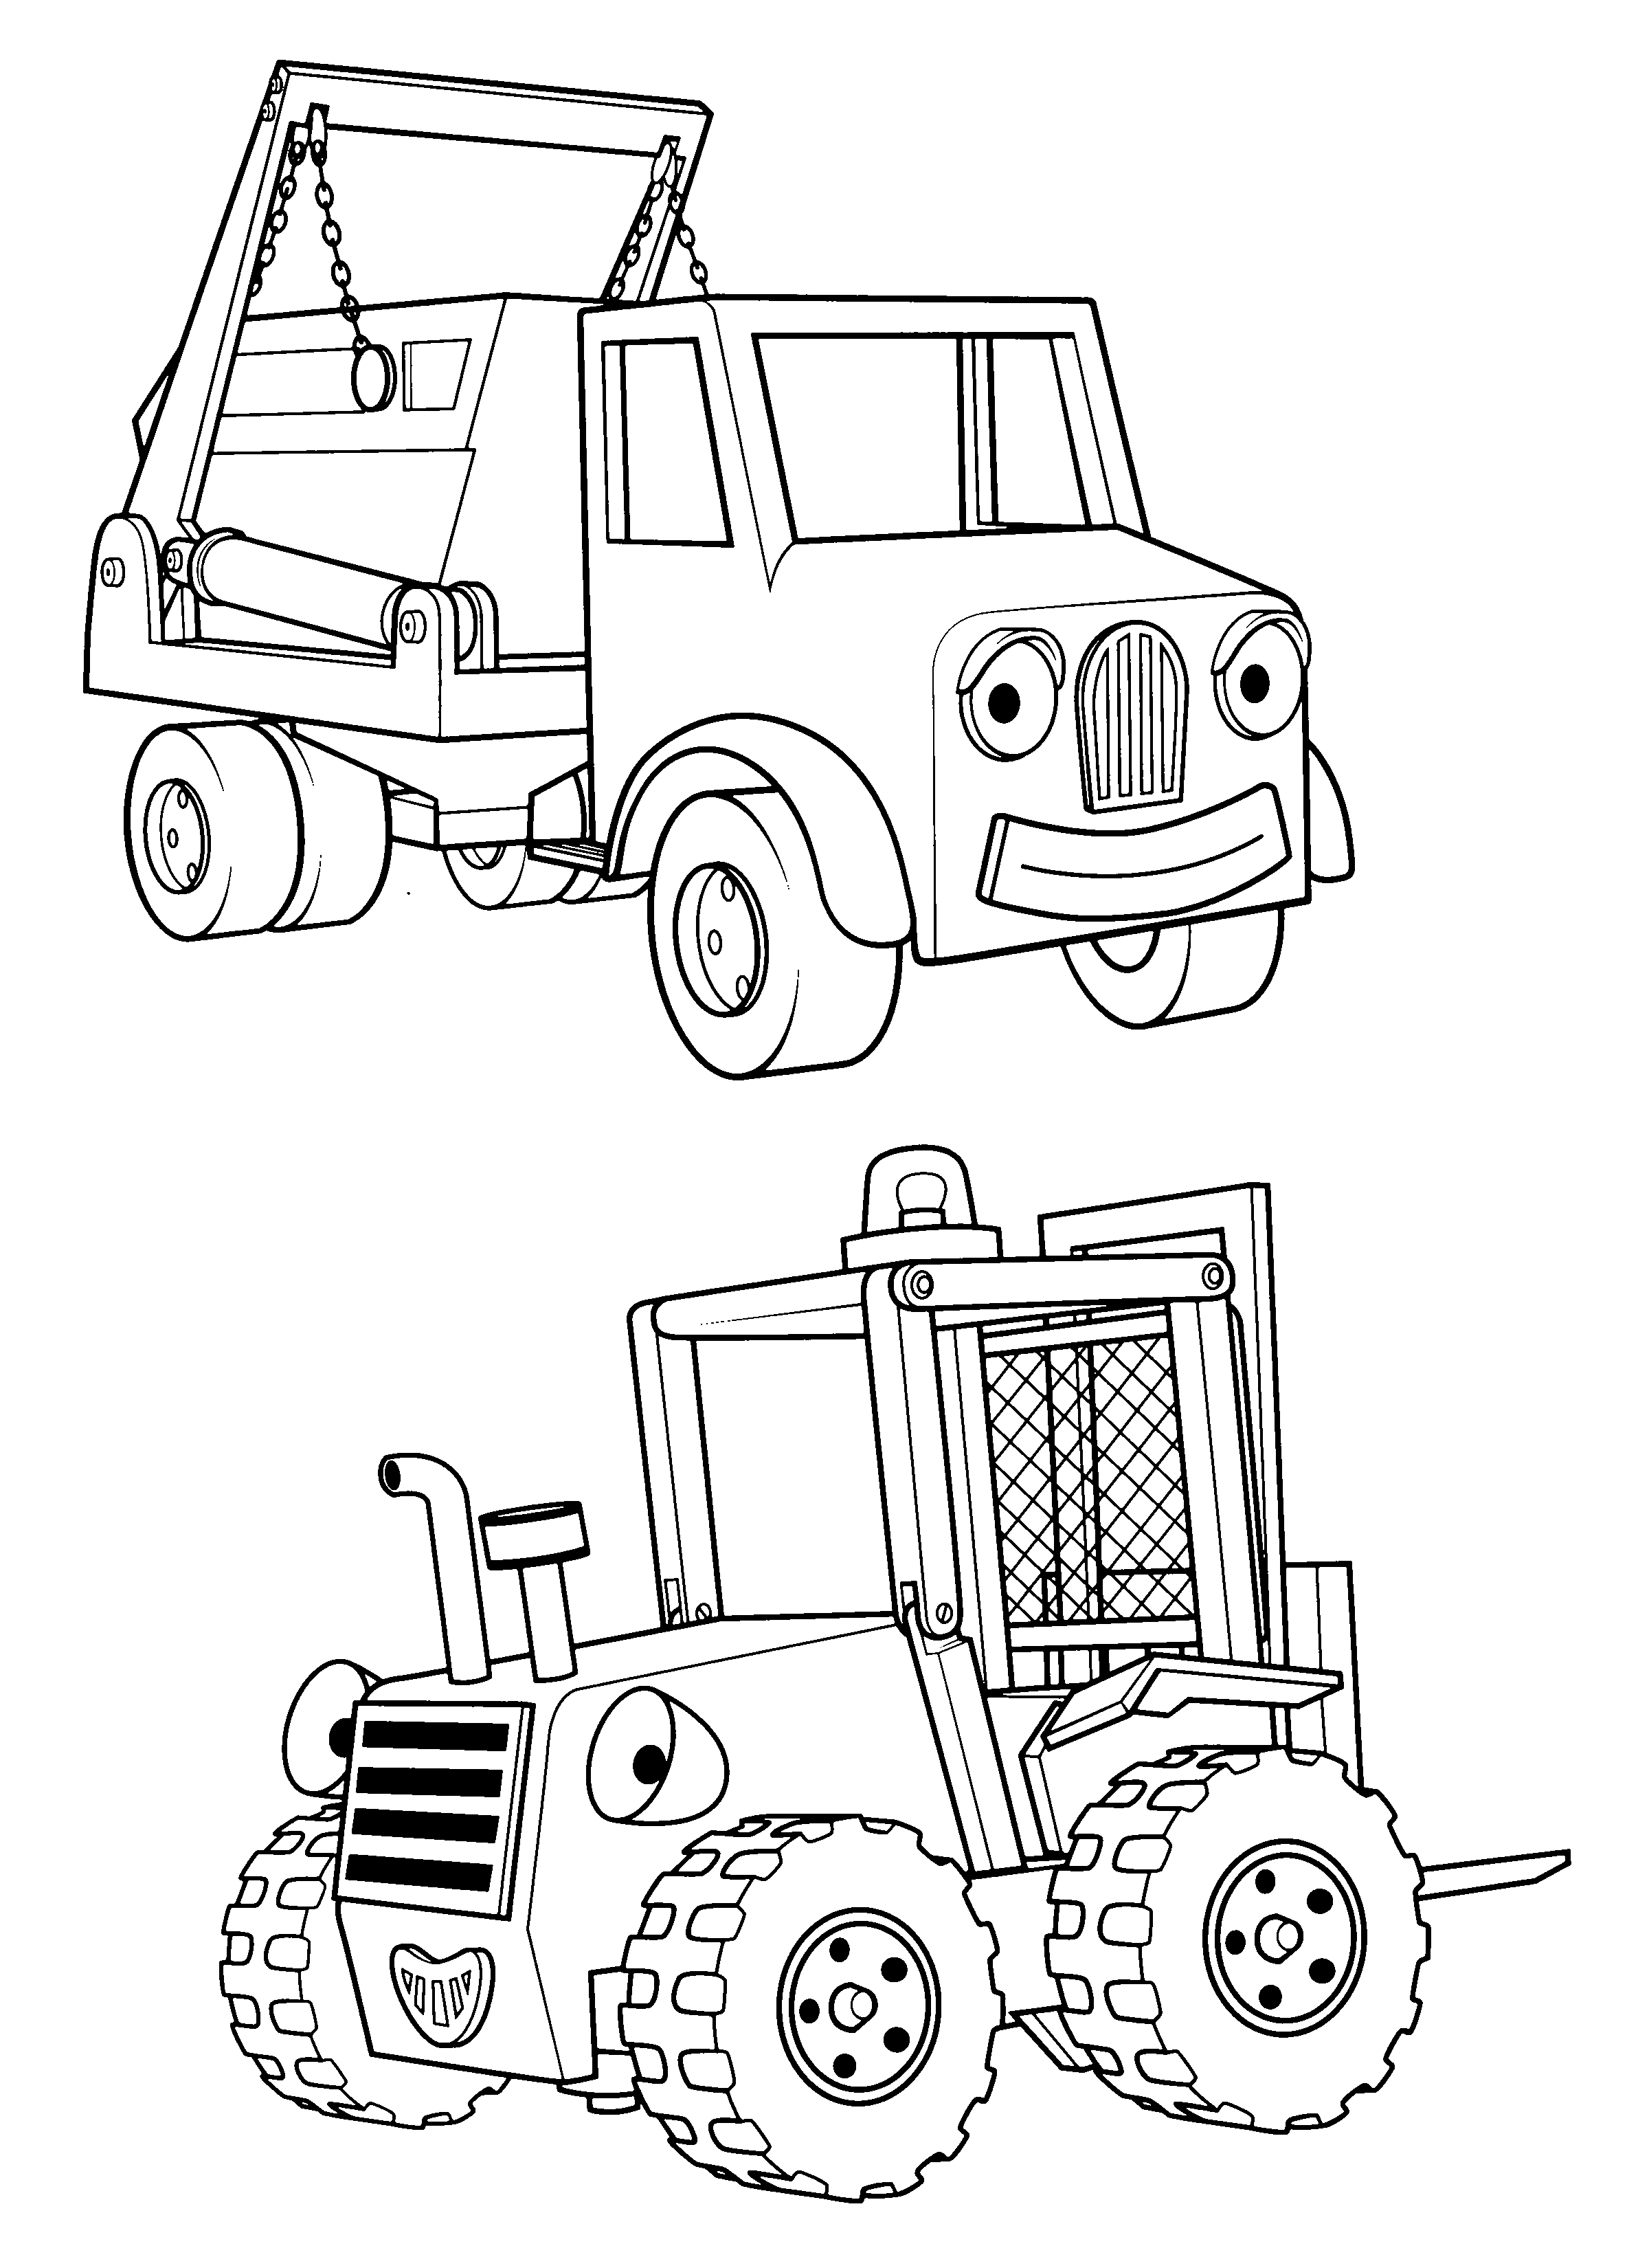 animated-coloring-pages-bob-the-builder-image-0022